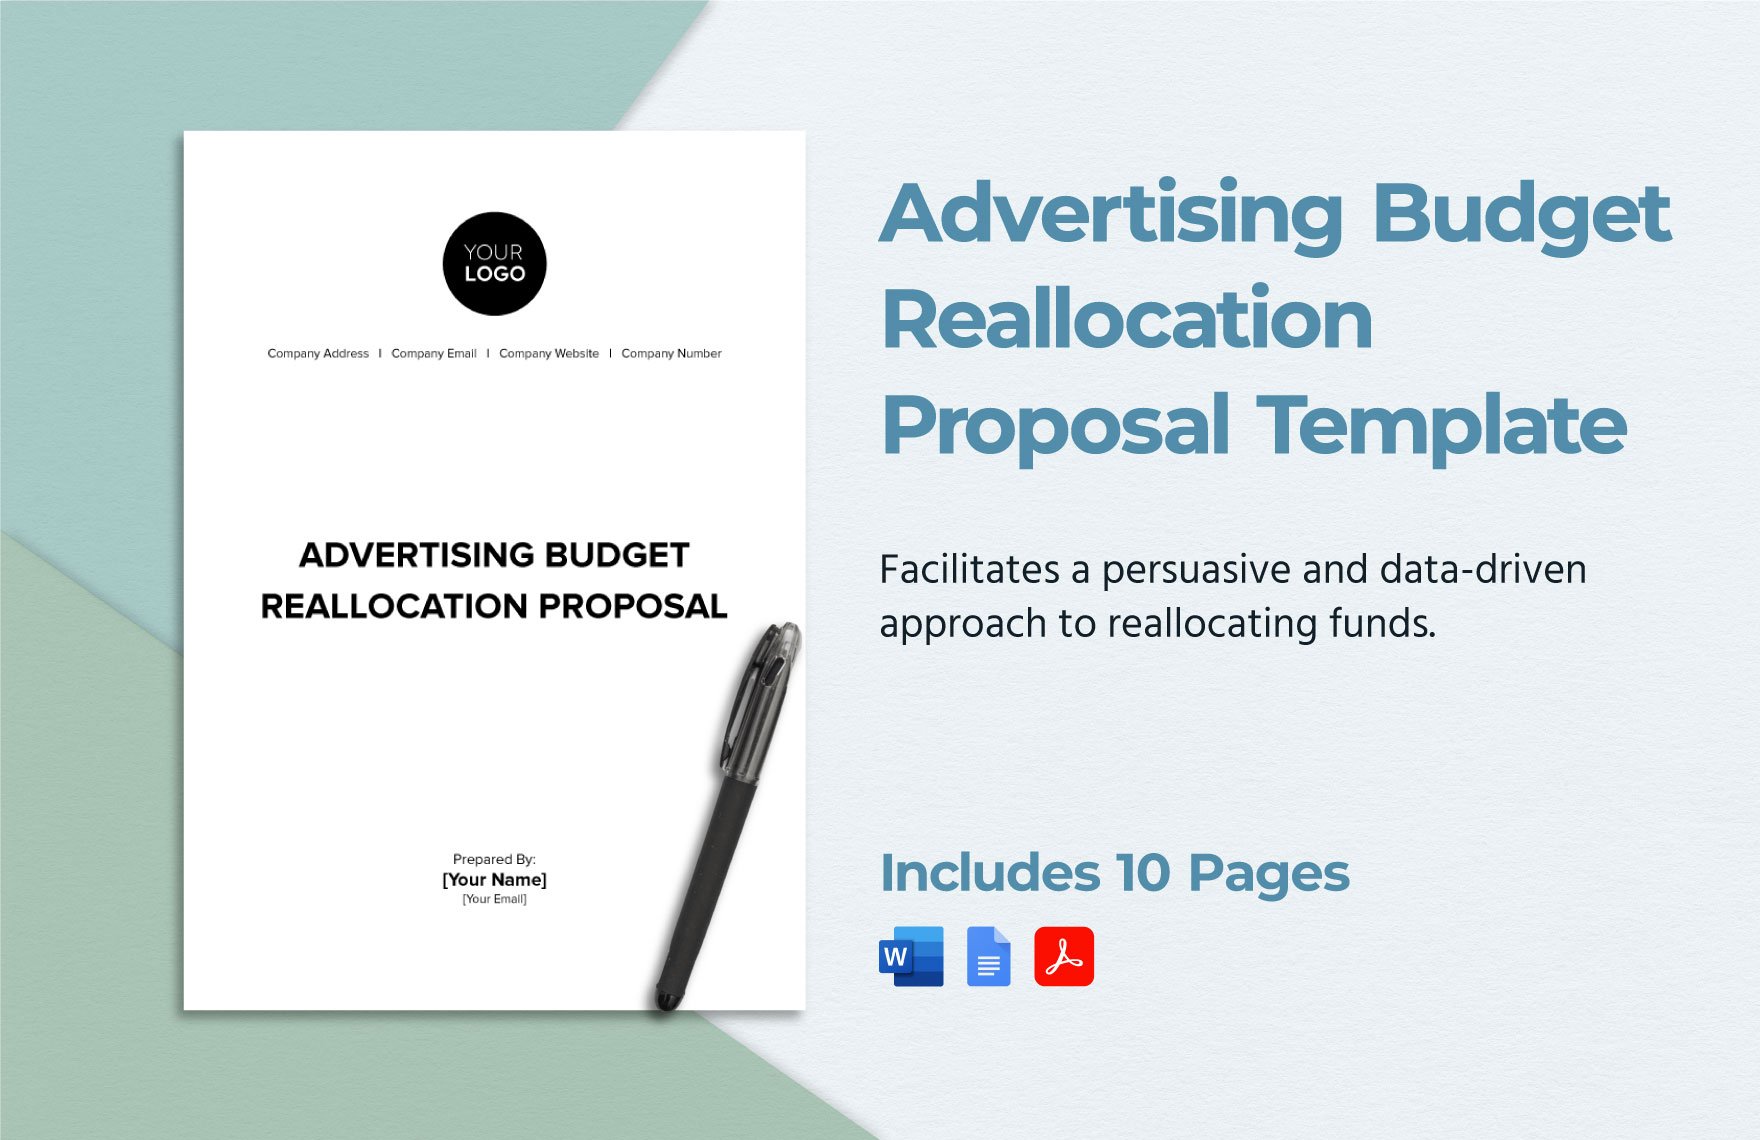 Advertising Budget Reallocation Proposal Template in Word, Google Docs, PDF